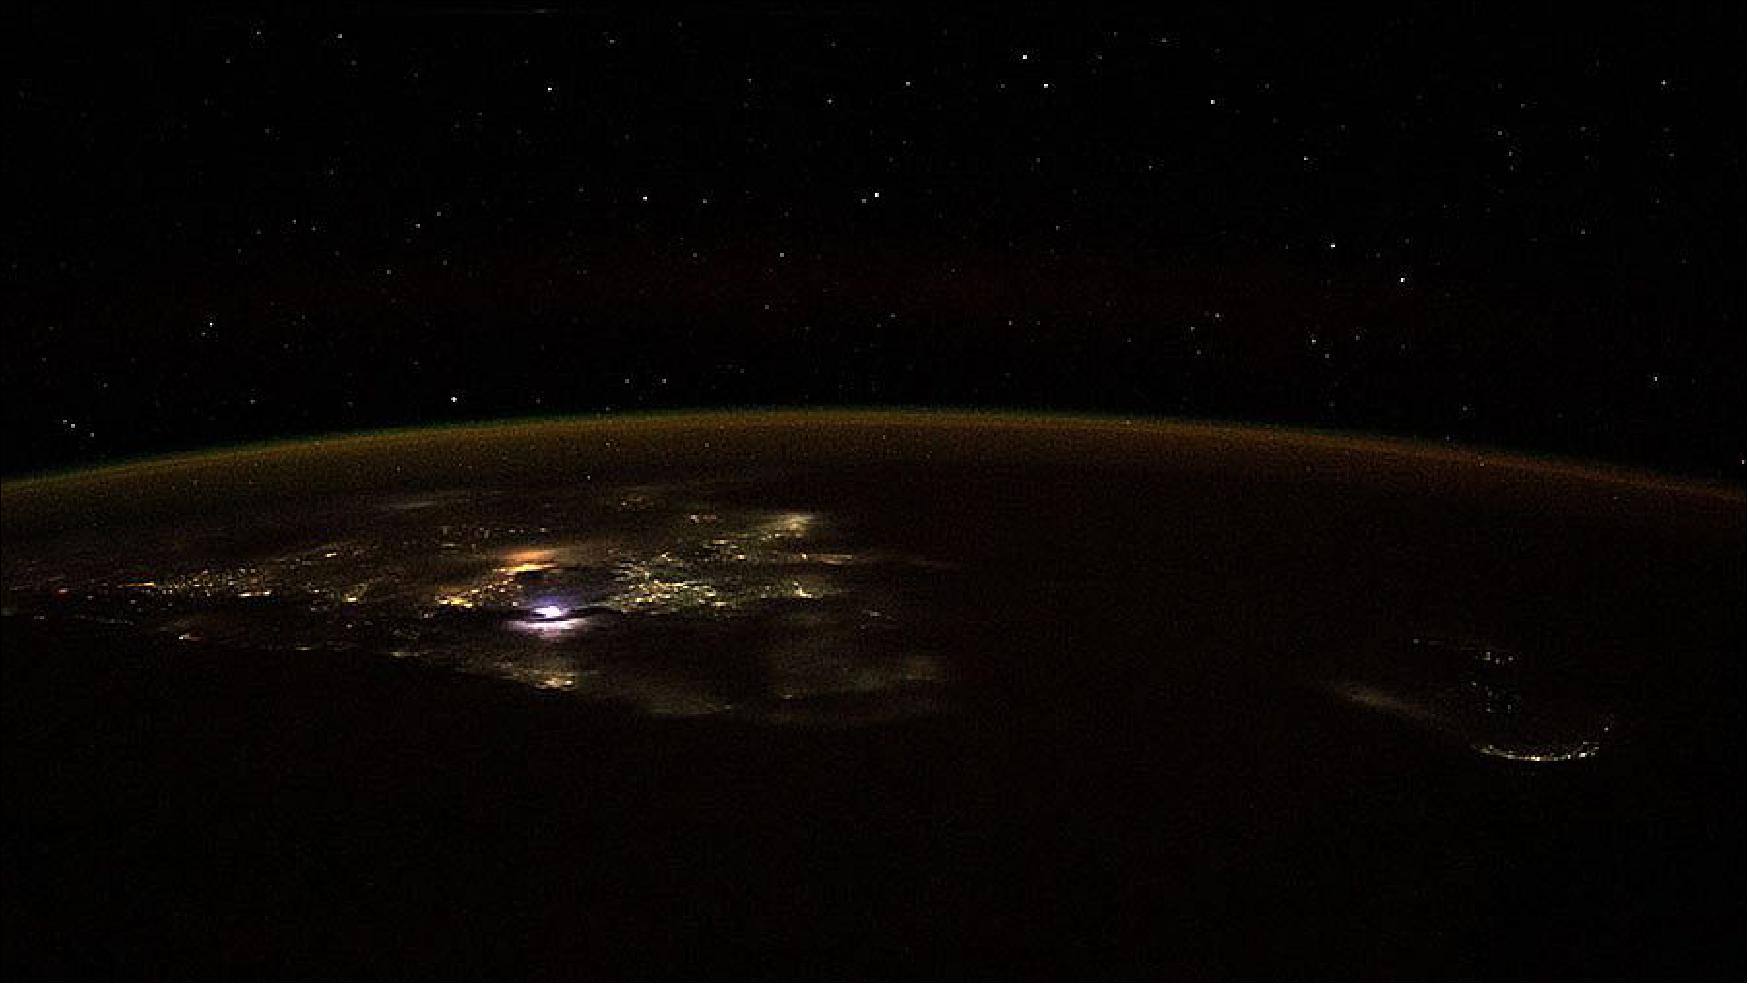 Figure 16: The city lights of southern India and the island nation of Sri Lanka, beneath the Earth's airglow, are pictured from the station as it orbited above the Indian Ocean (image credit: NASA)